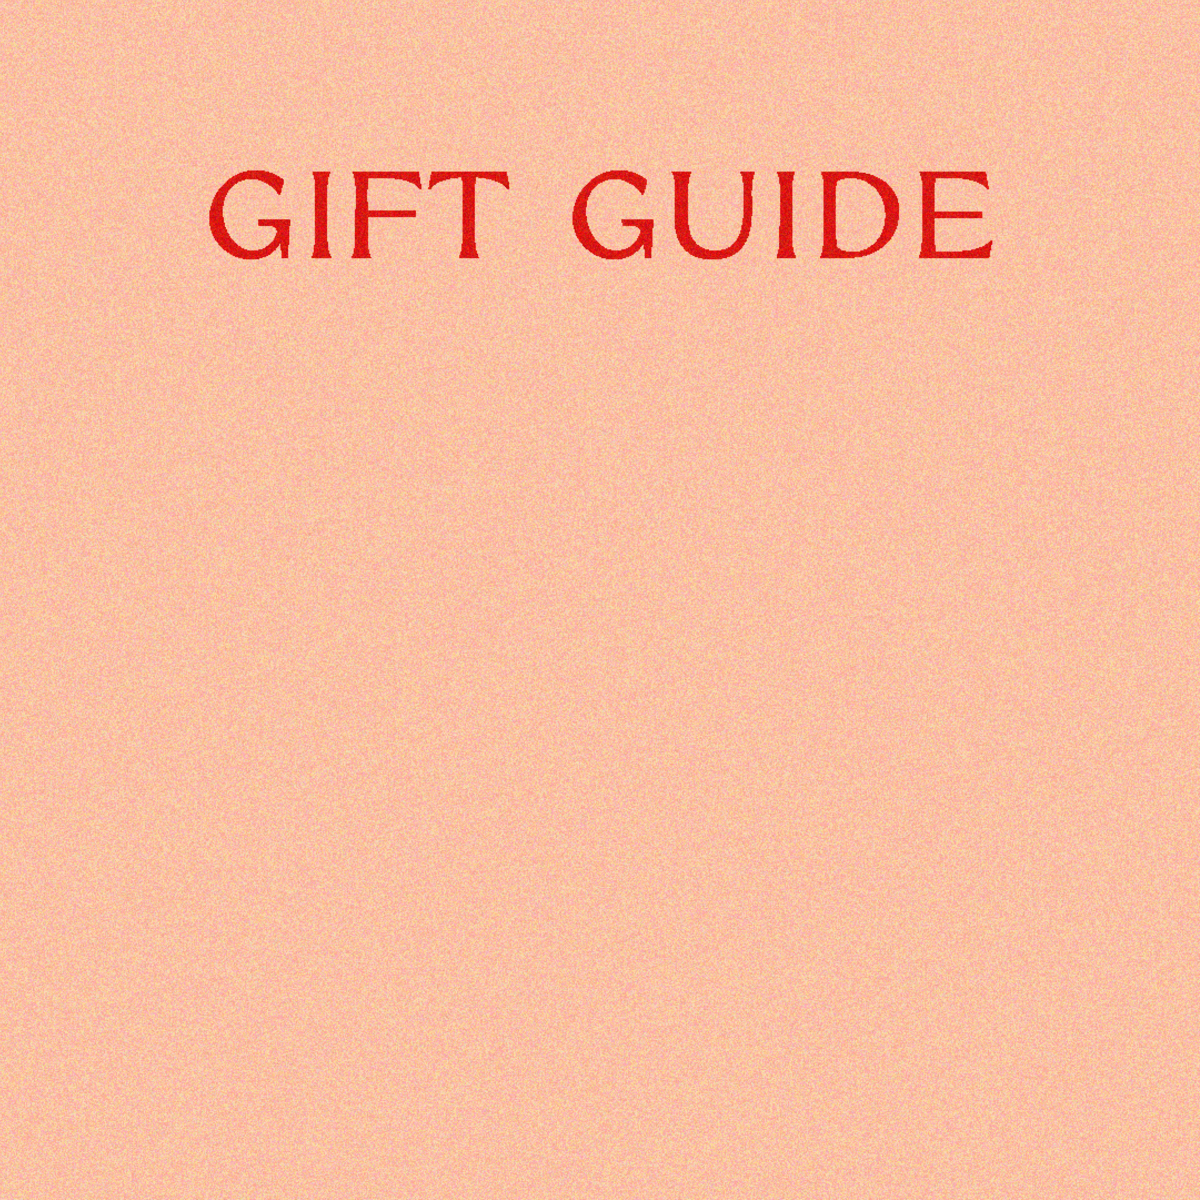 Gift guide, gift guide for creatives, creative gift guide, 2021 gift guide, Christmas gift guide